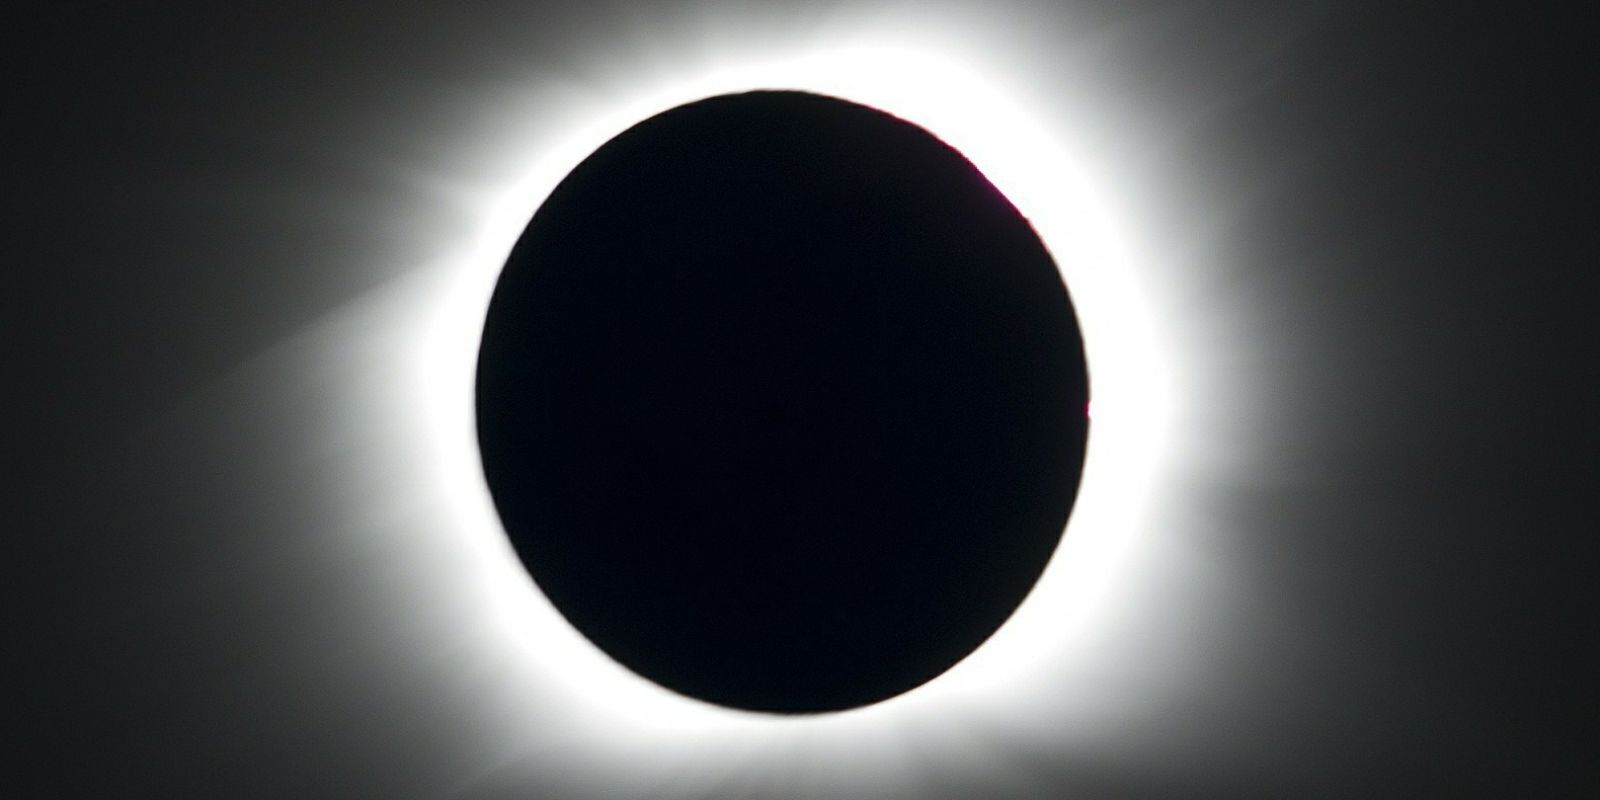 The Most Exclusive Way to Watch This Month’s Total Eclipse